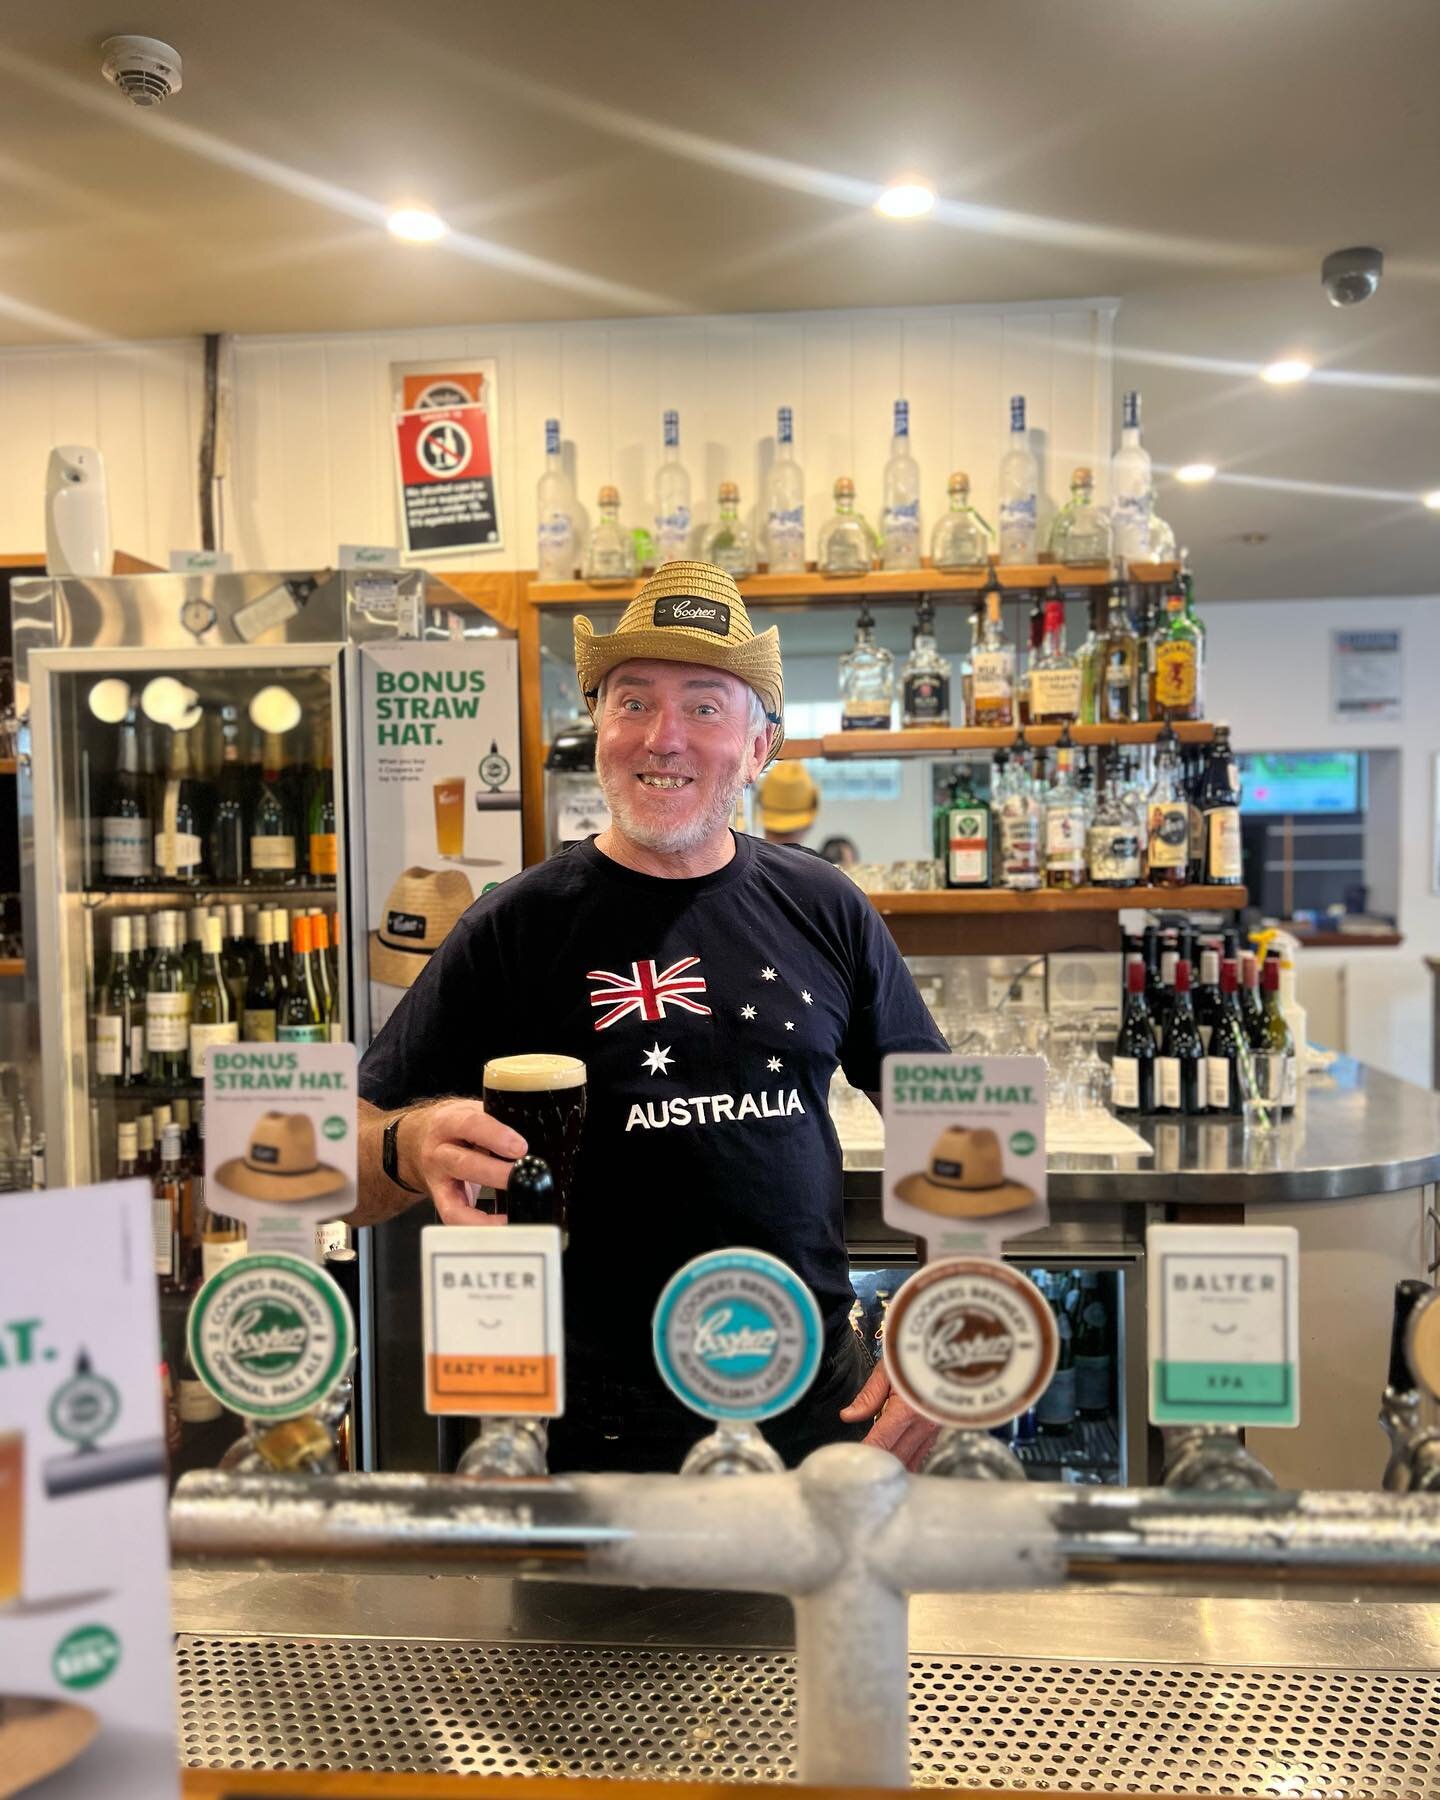 Grab your coopers hat today!! Featuring our publican Steve! 🤠🤠